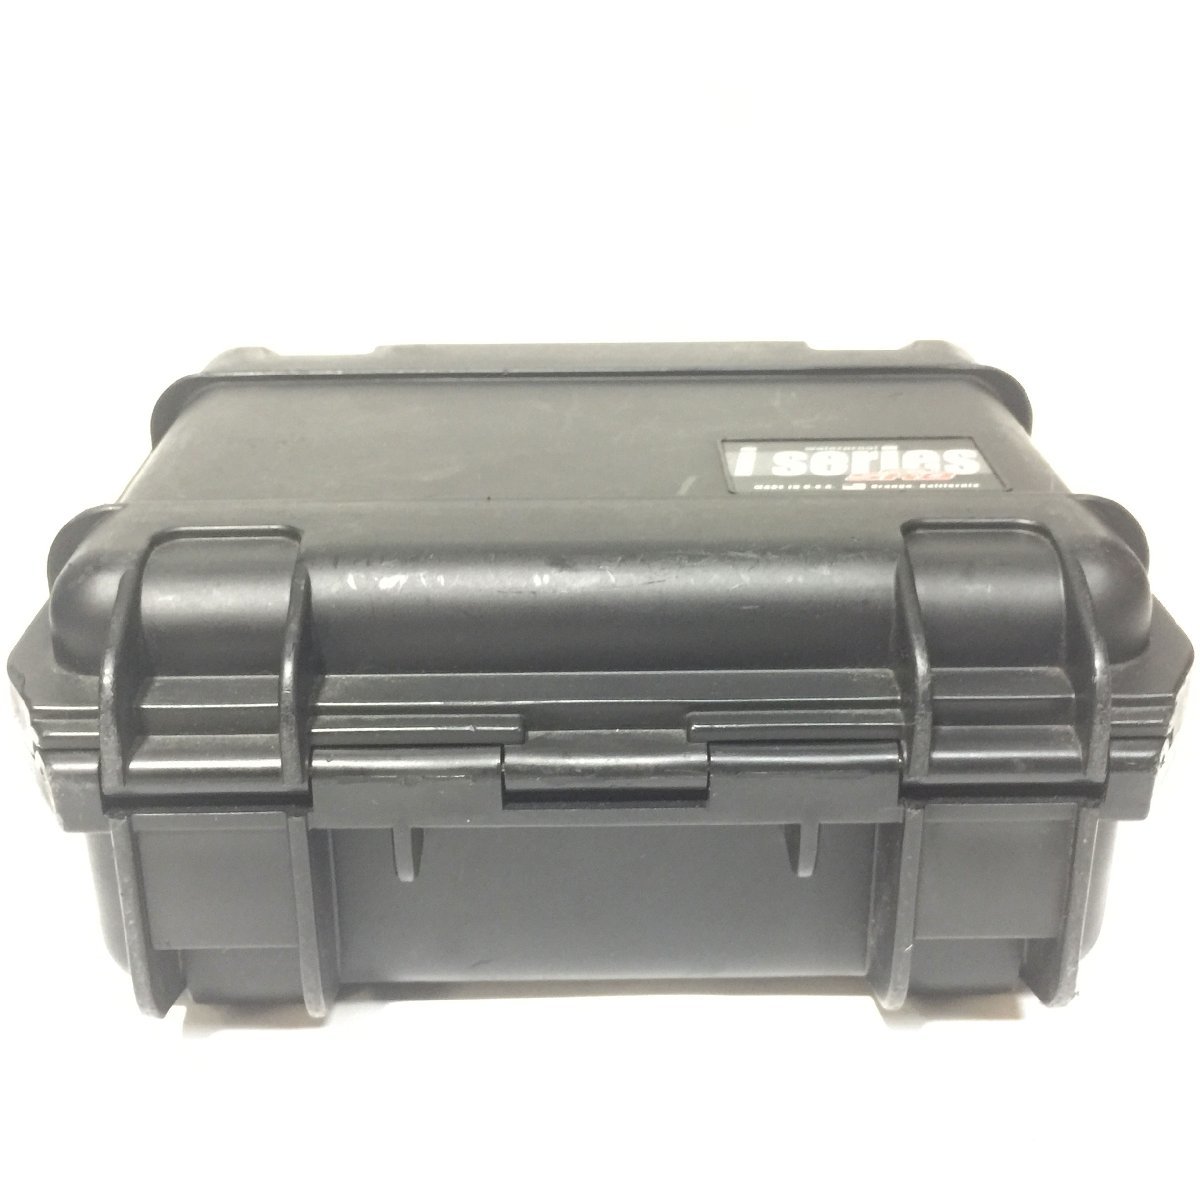 SKB i series waterproof 3I-0907-4B-E USA made machinery case waterproof / dustproof specification hard case carrying case ②